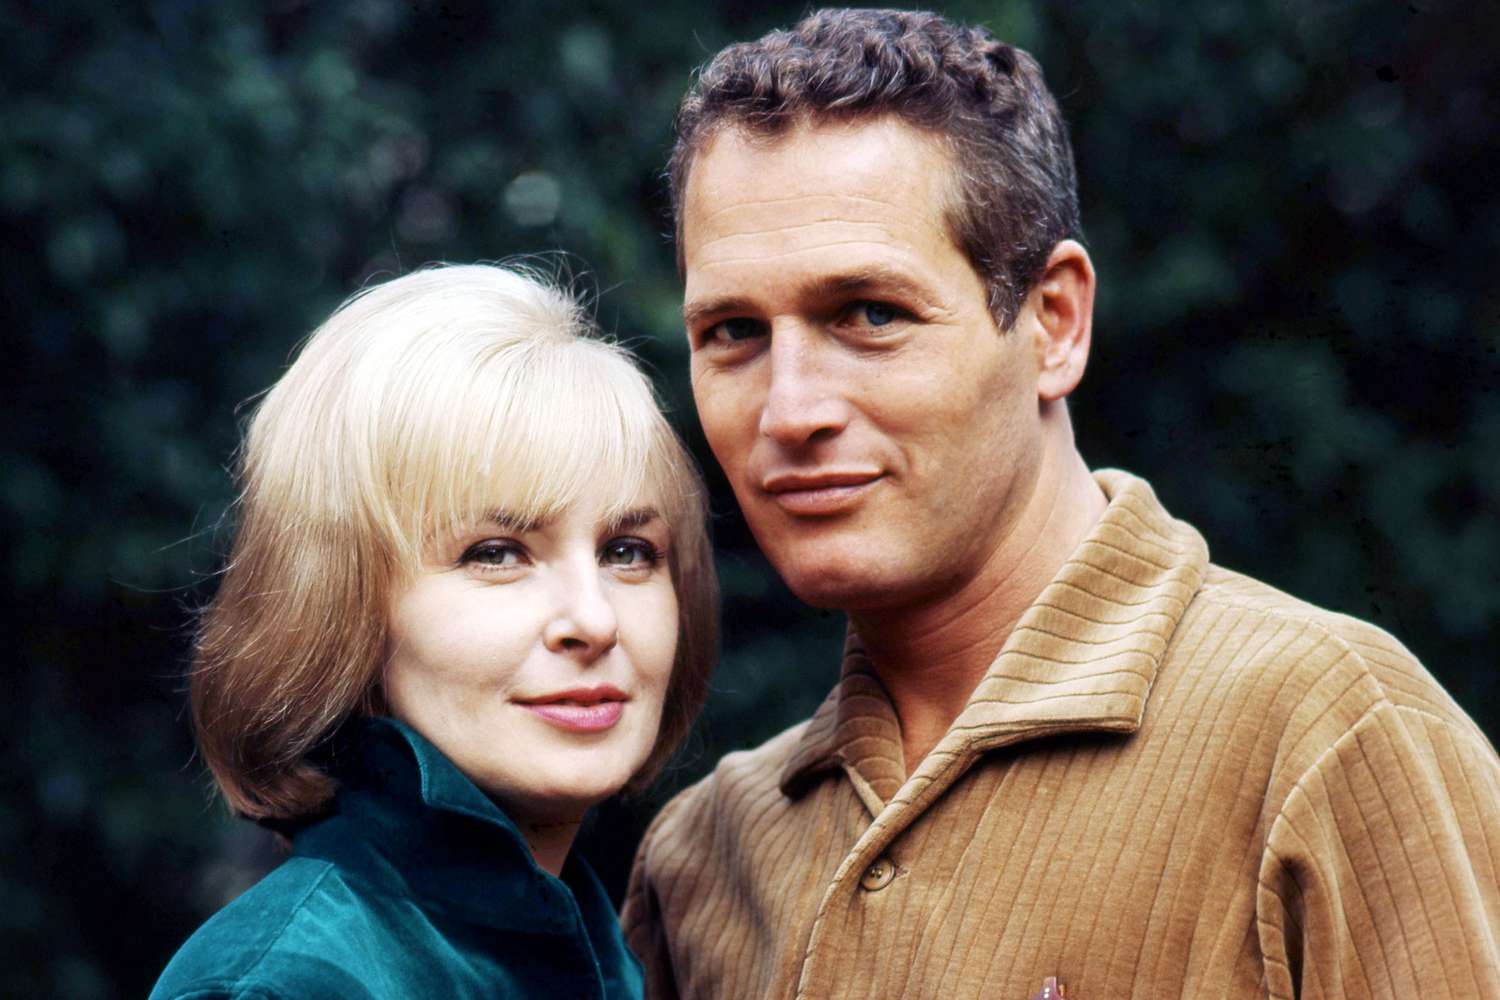 American actor Paul Newman (1925 - 2008) with his wife, American actress Joanne Woodward, circa 1965.